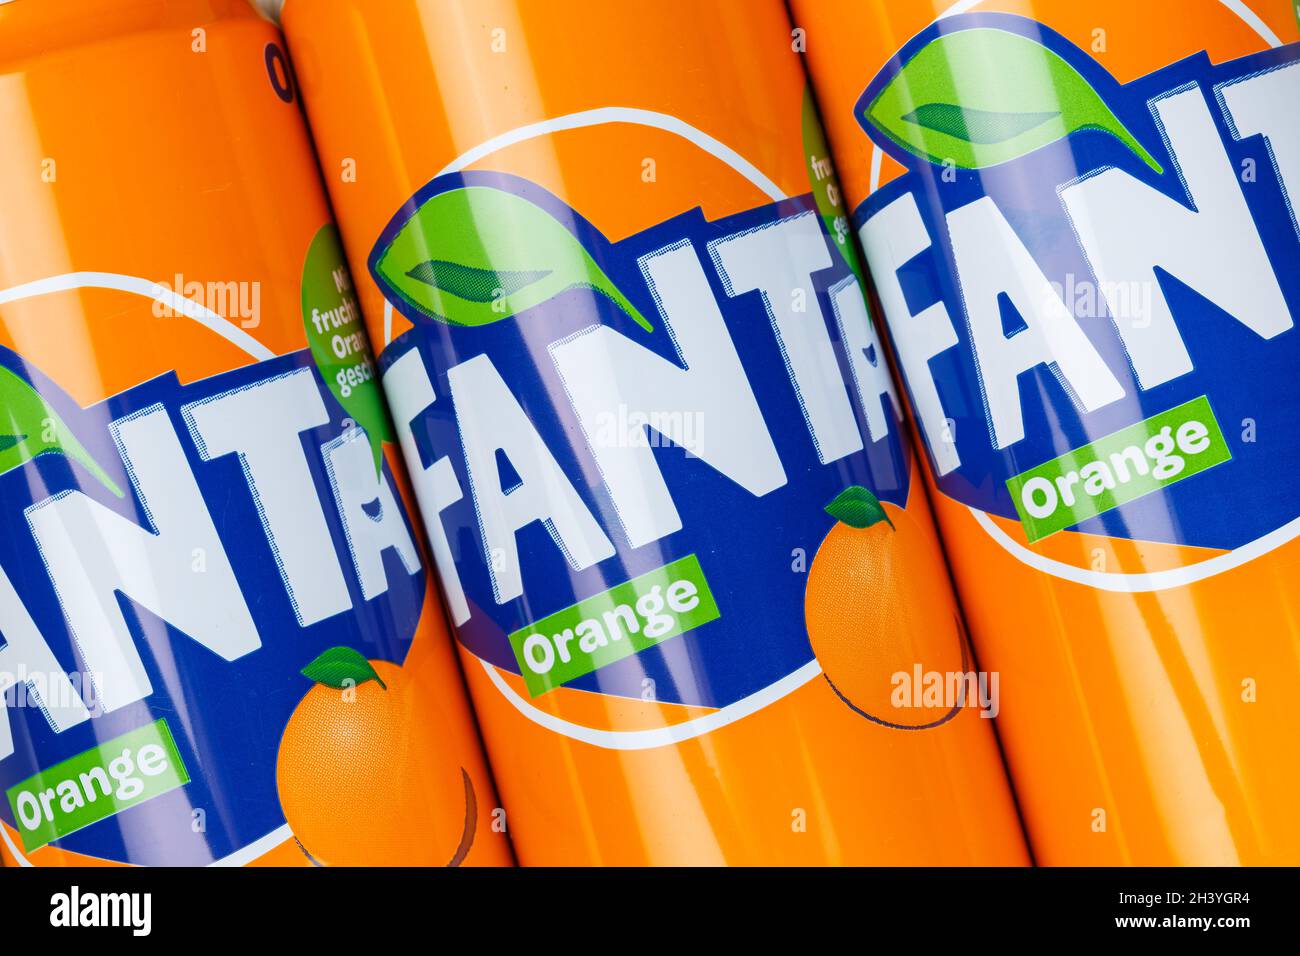 Fanta Can High Resolution Stock Photography and Images - Alamy